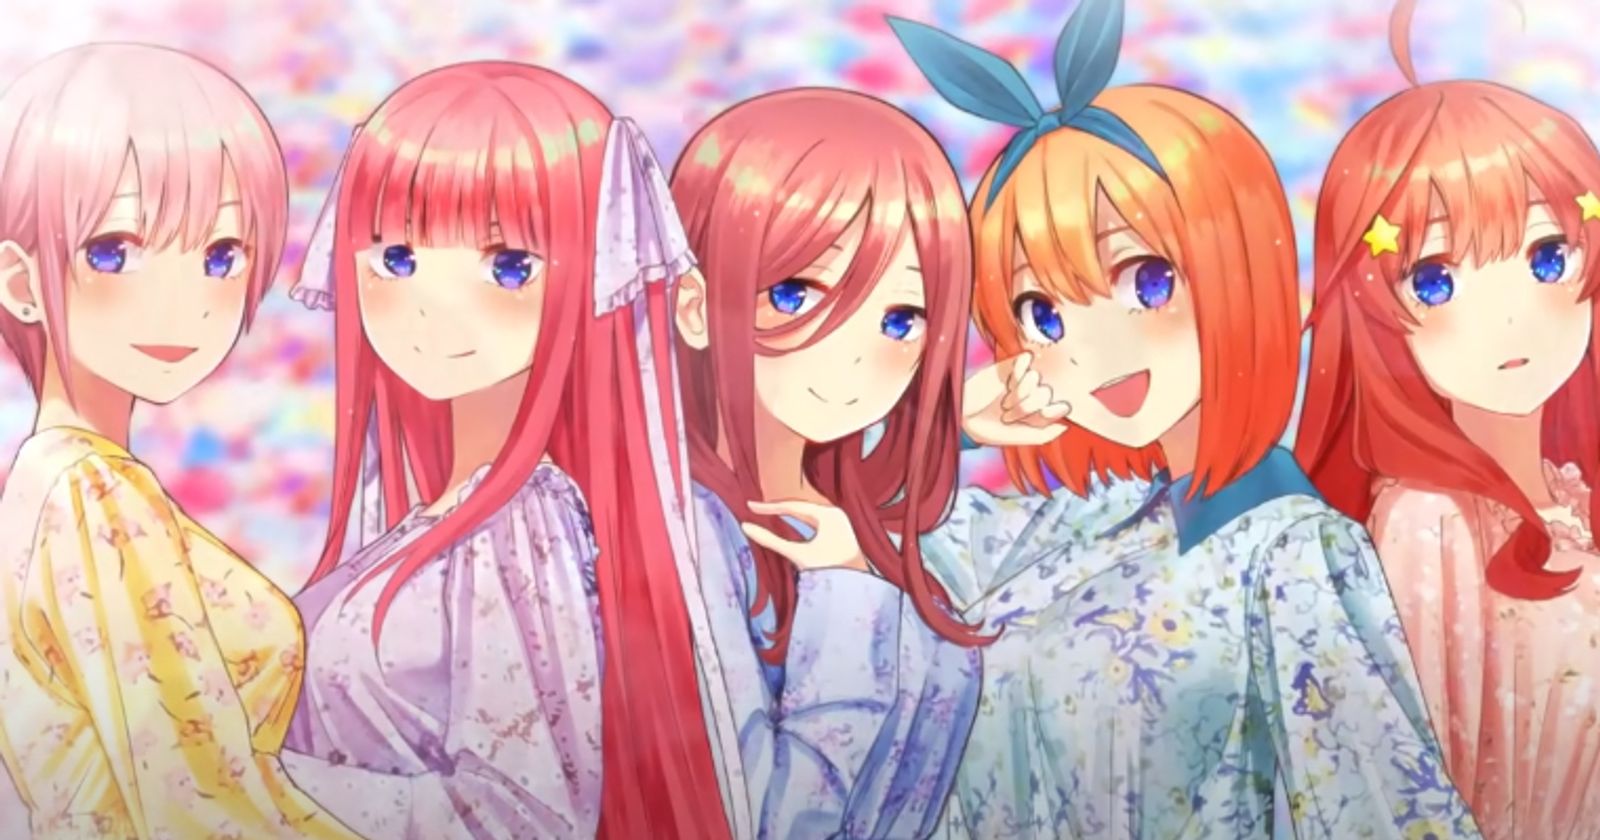 The Quintessential Quintuplets Season 2 - streaming online